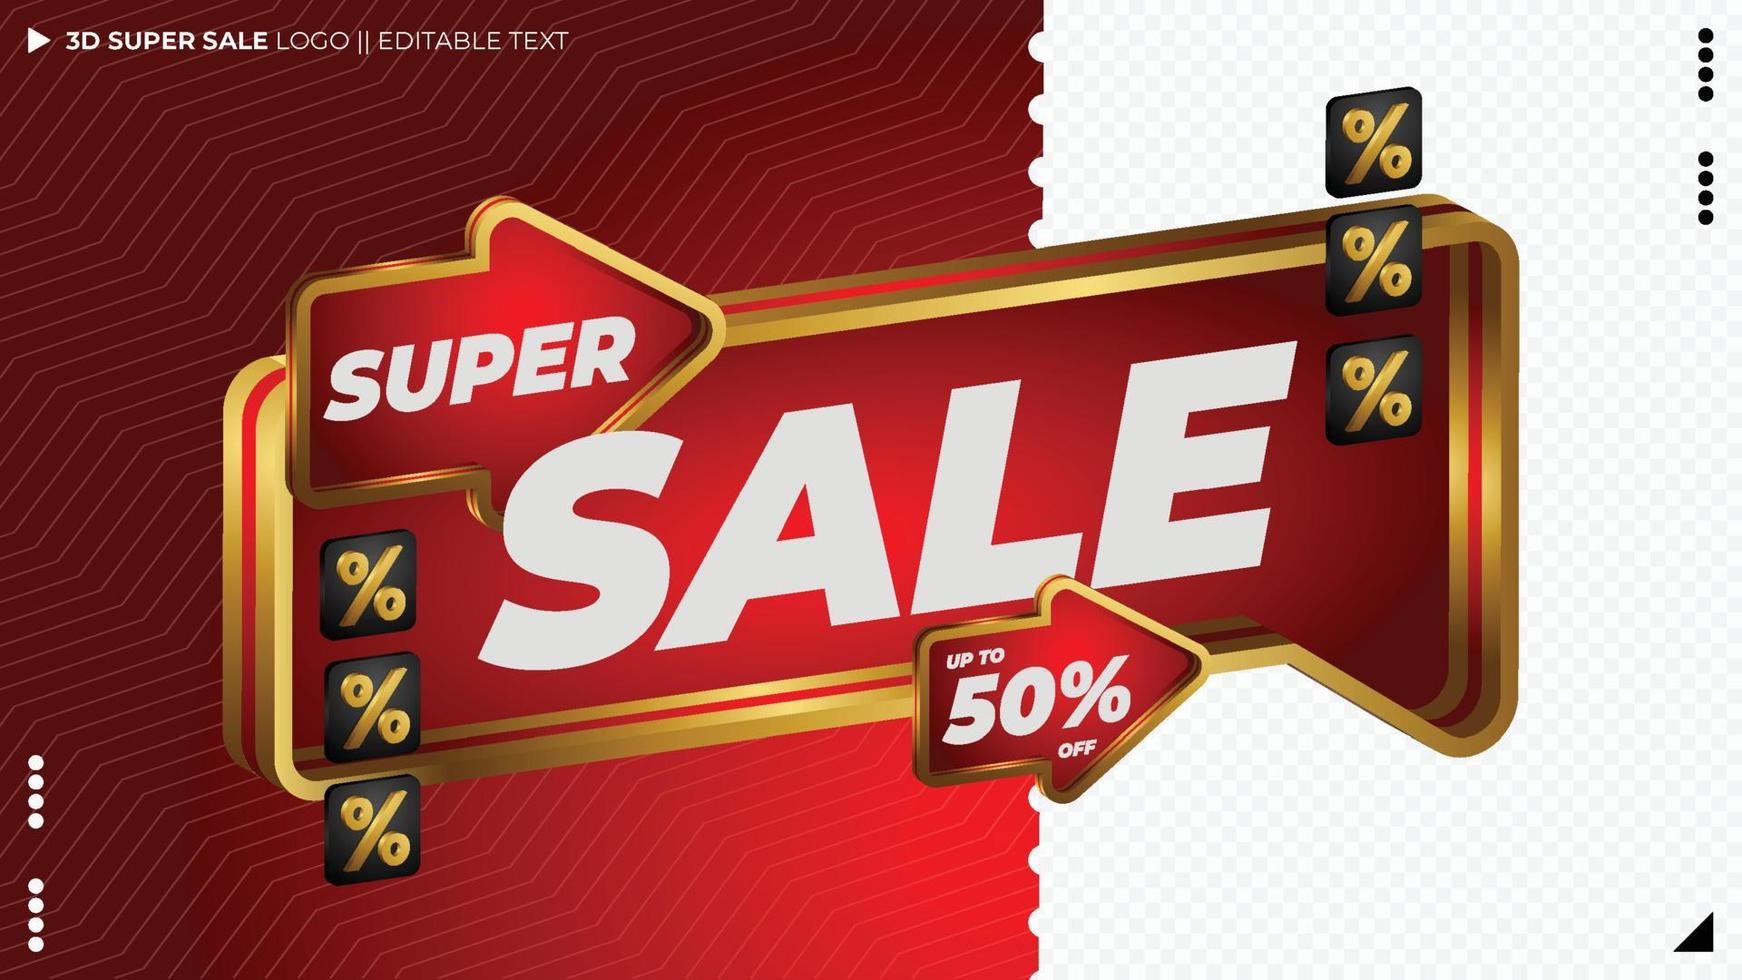 premium super sale sign with text editable text vector